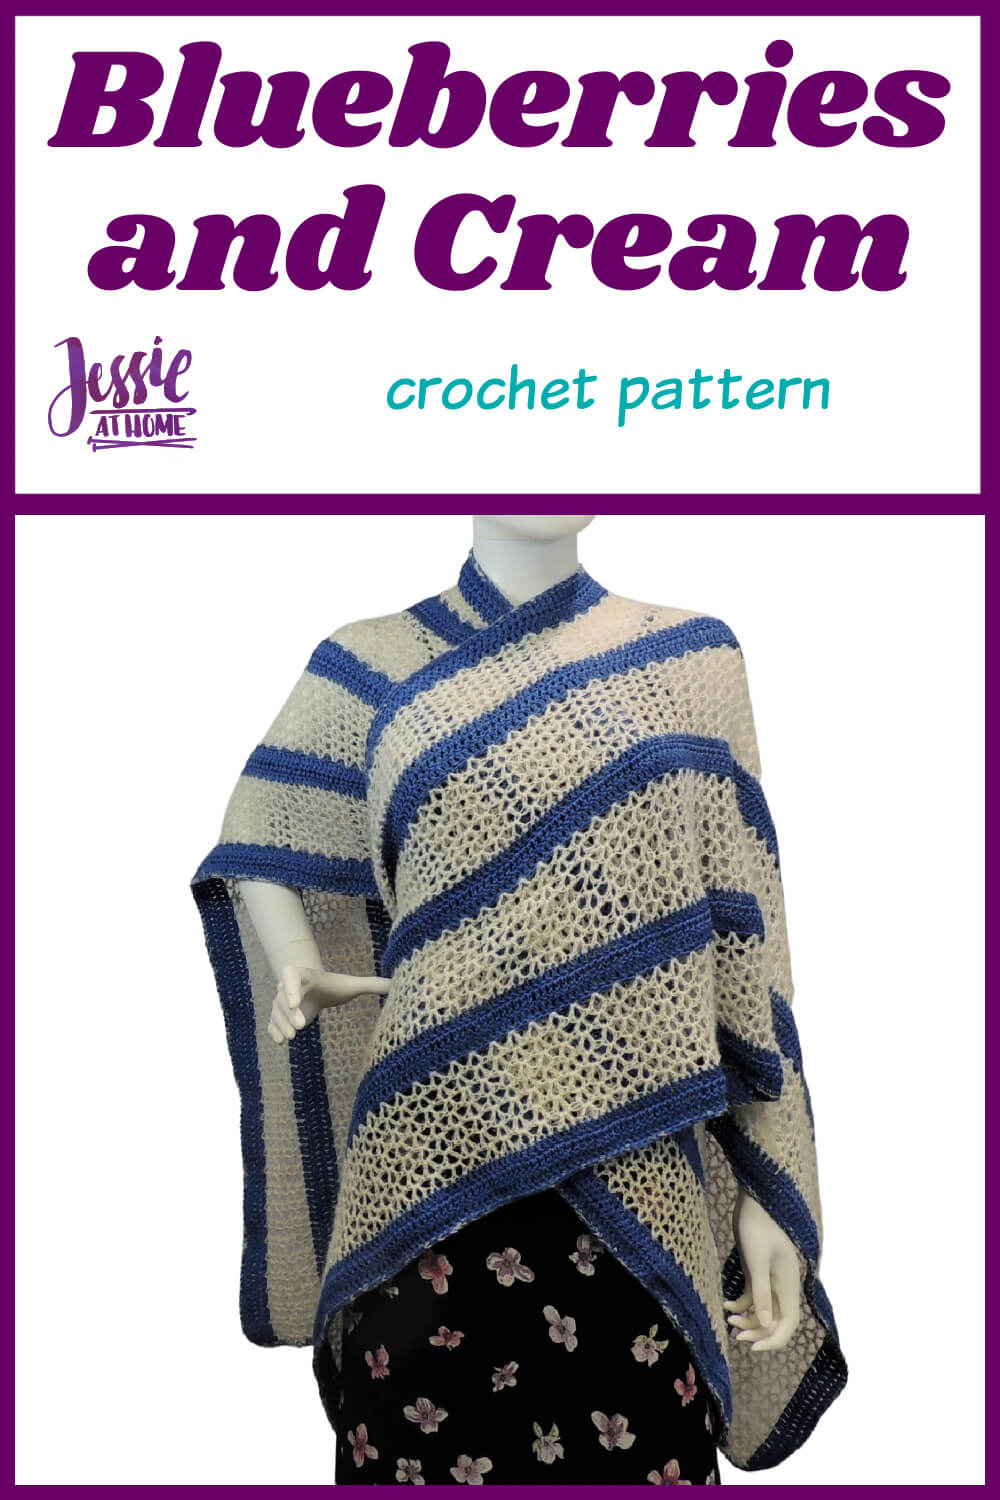 Blueberries and Cream - free crochet pattern for a fabulous ruana wrap